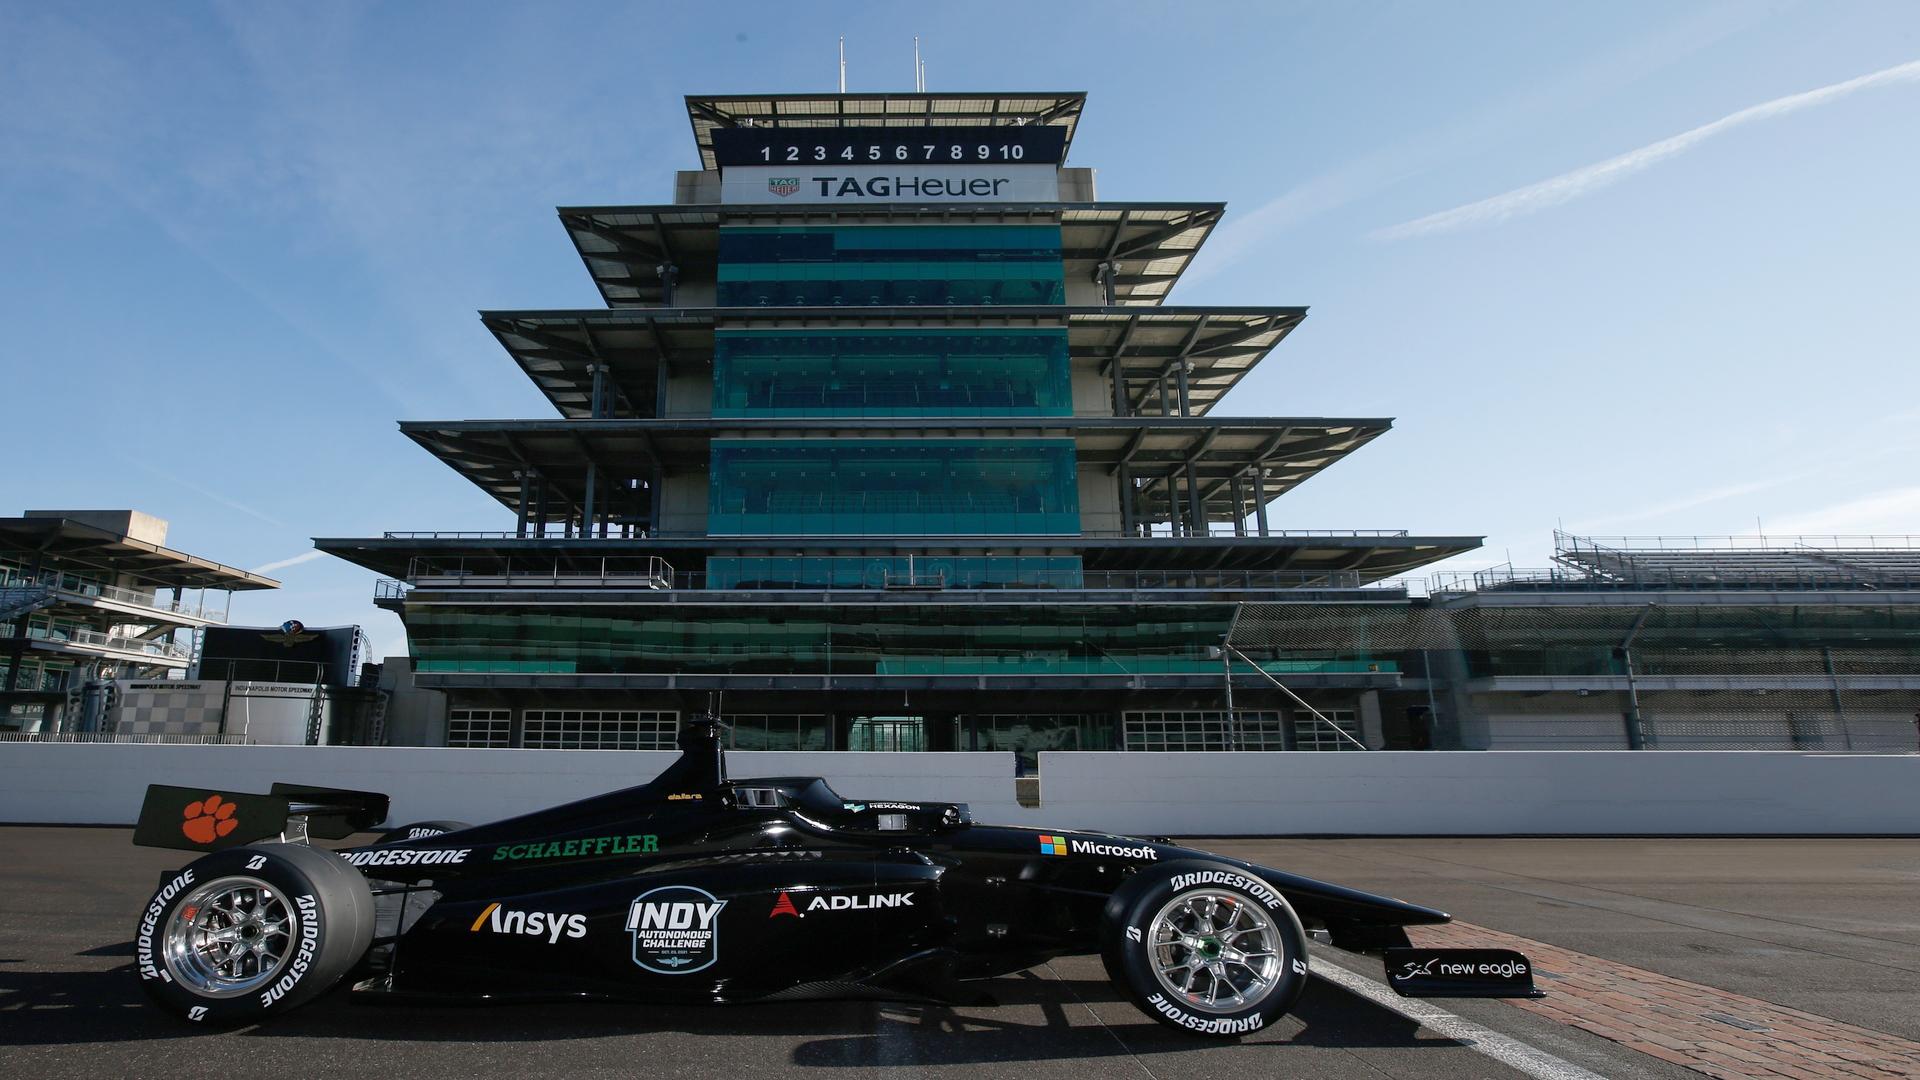 The Indy Autonomous Challenge on Oct. 23 will feature self-driving racing cars.